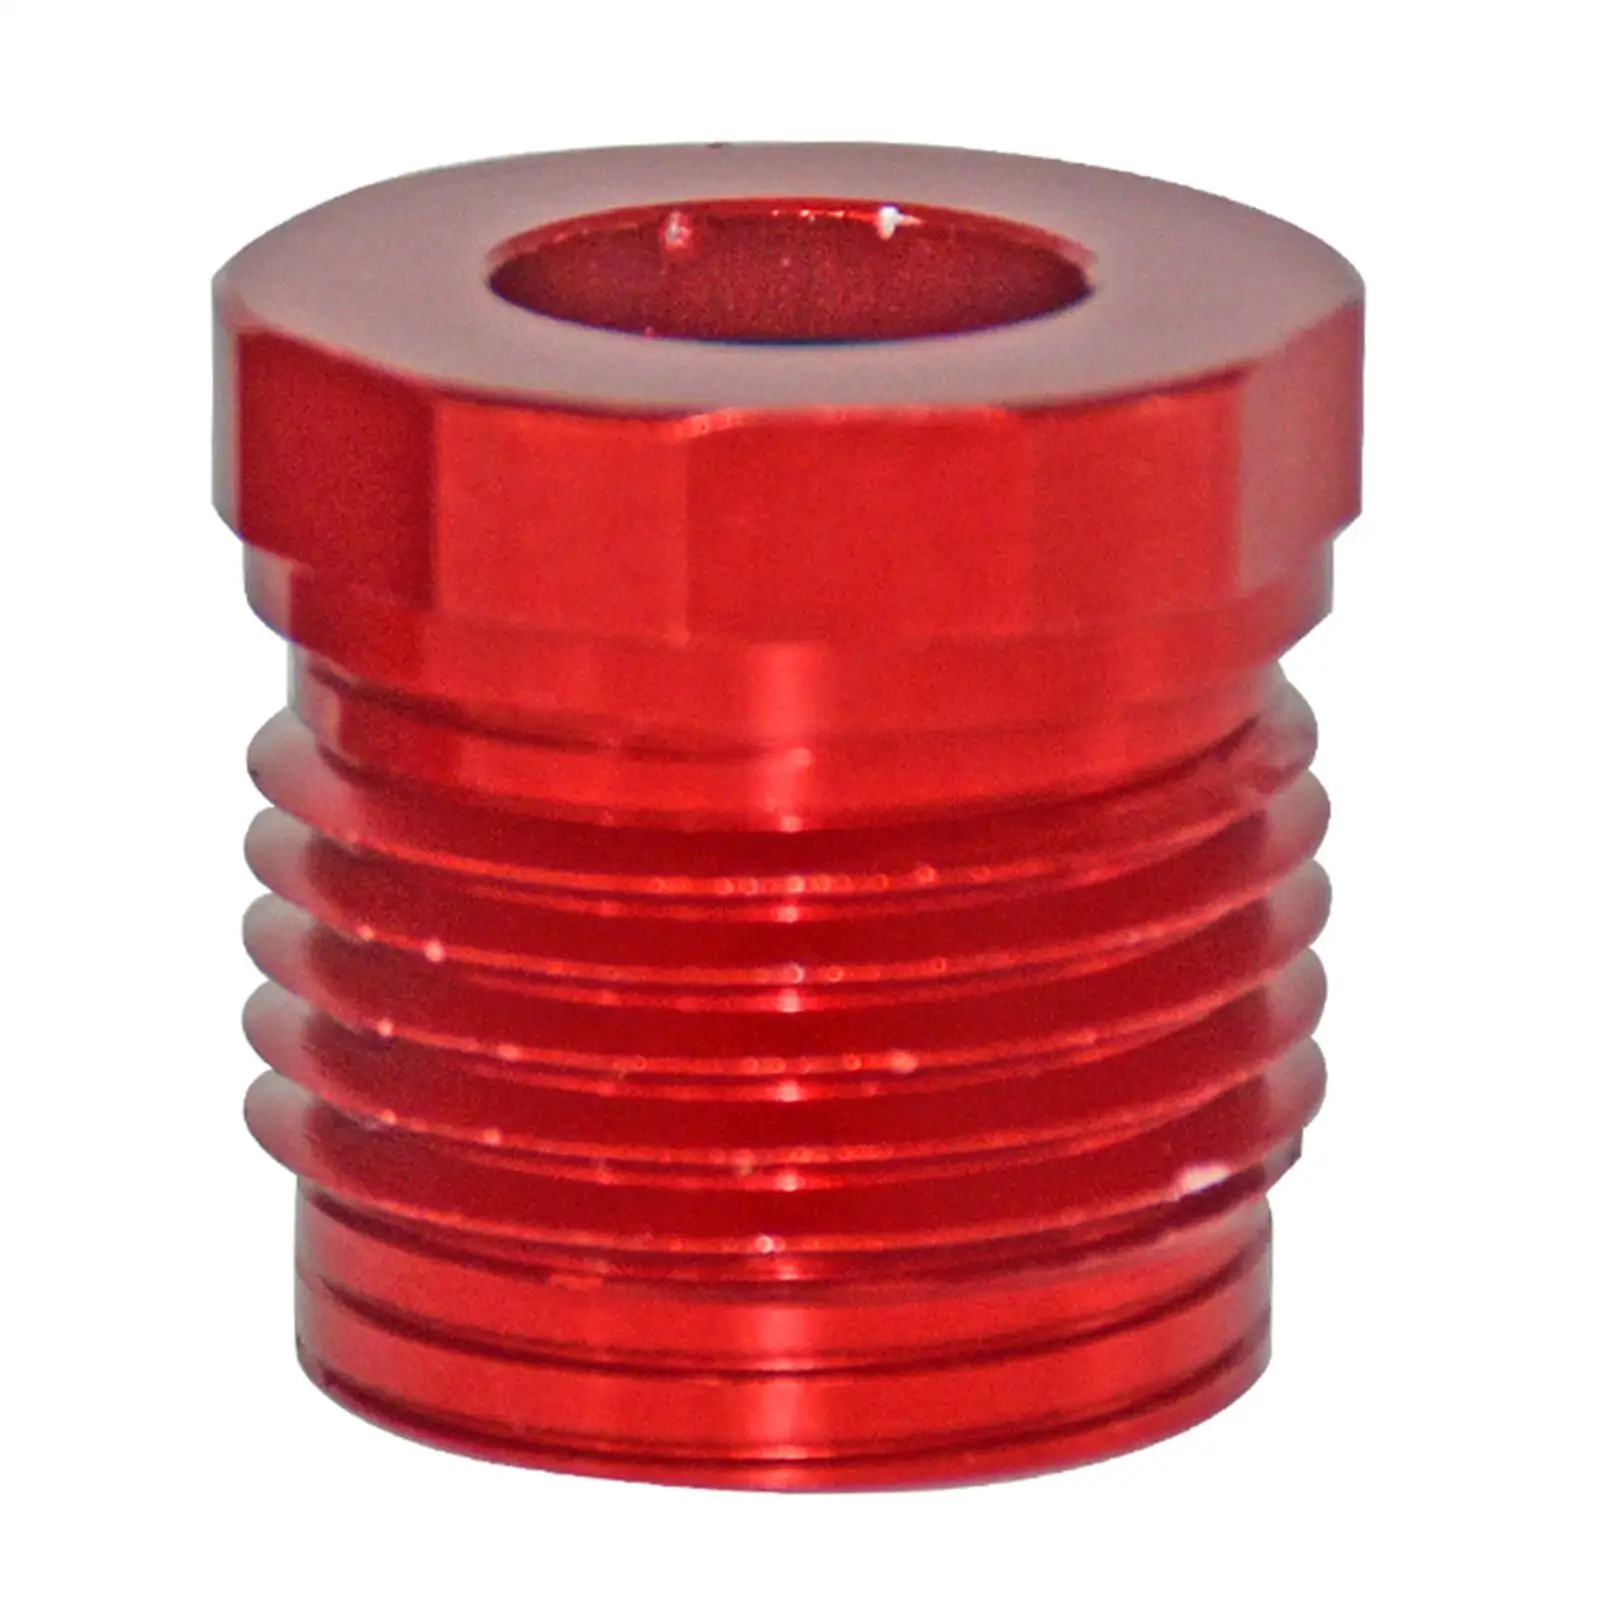 Steering and Reverse Cable Lock Nut Professional Replaces Durable Red Cable Lock Nut for Sea-Doo GTX XP140 GTI Accessories